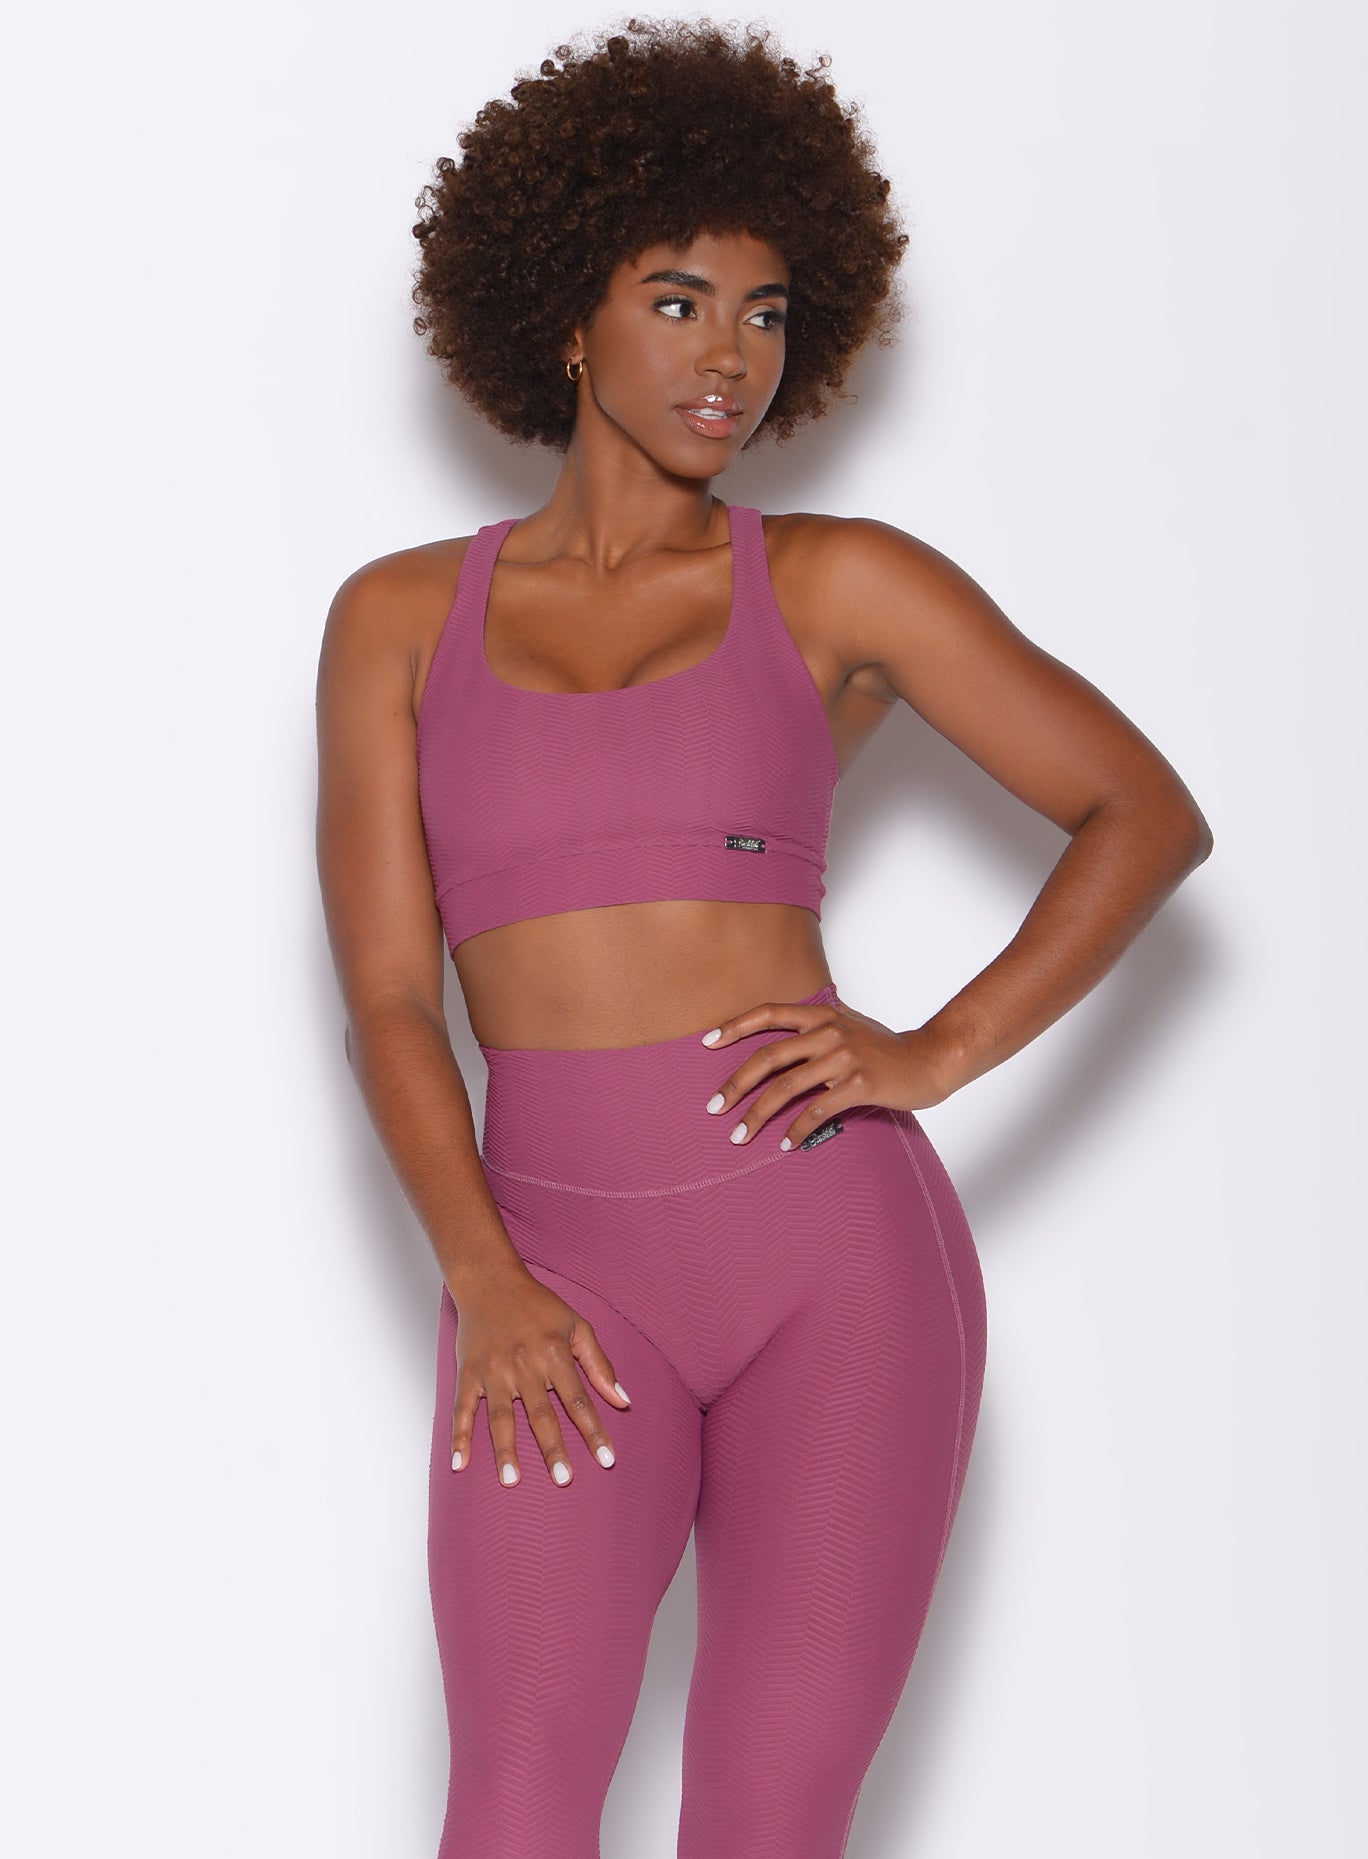 Front profile view of a model facing to her left wearing our chevron sports bra in rose wine color and a matching leggings